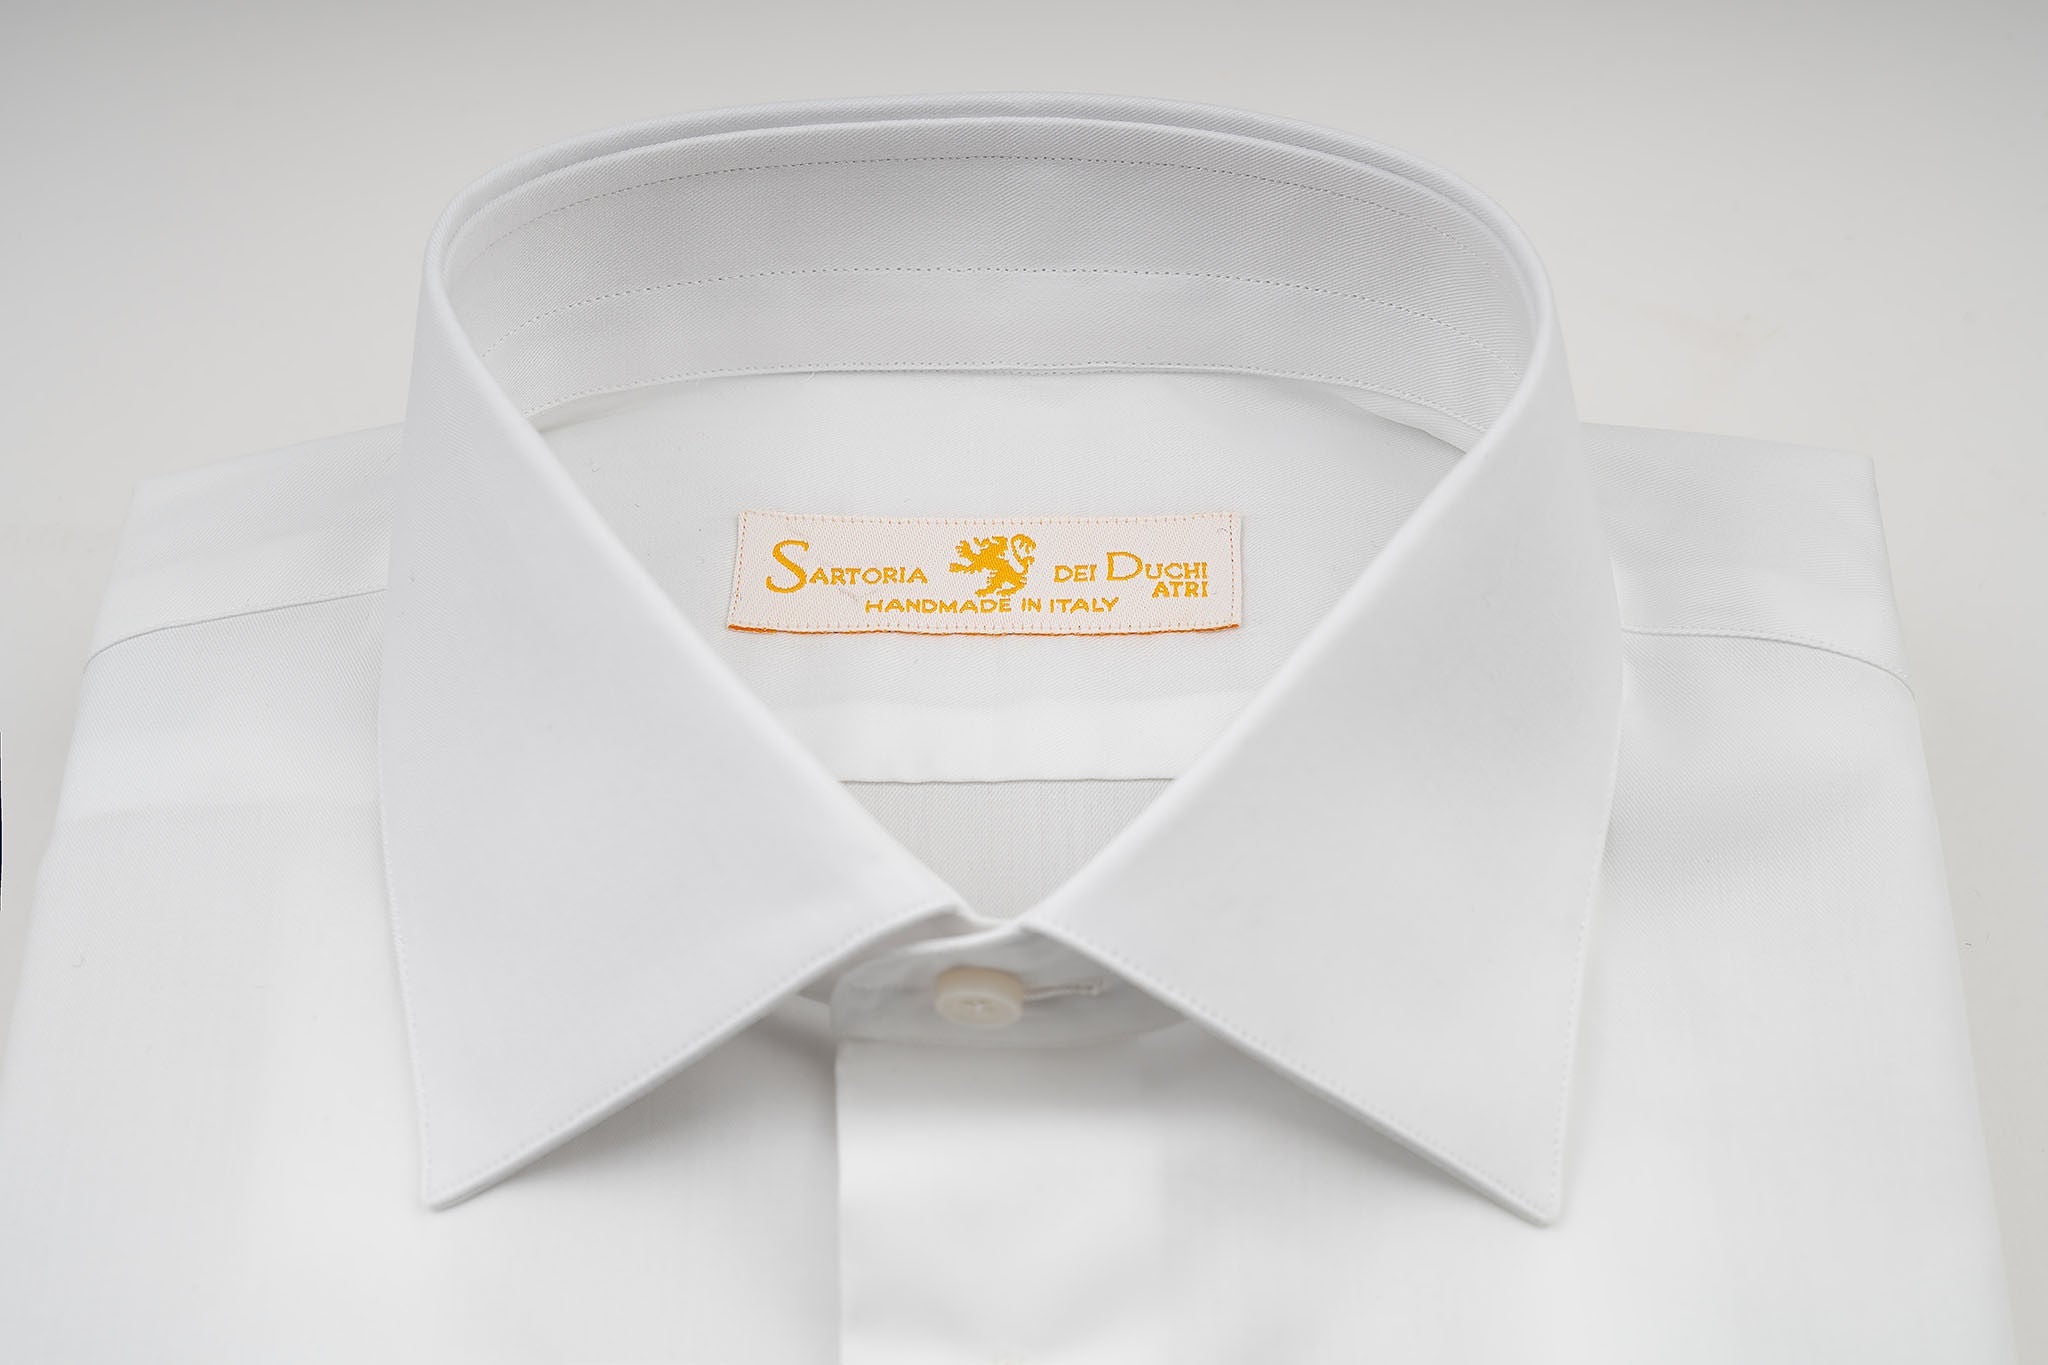 Made with a 140/2 cotton twill by Thomas Mason &quot;Hampton&quot;,  in white color. This long sleeve shirt is made with  a semi French collar and a rounded wrist. The stitching  is 5 mm and the buttons, applied by hand, are in mother  of pearl Australia.  The fit is regular-Sartoria Dei Duchi-Atri